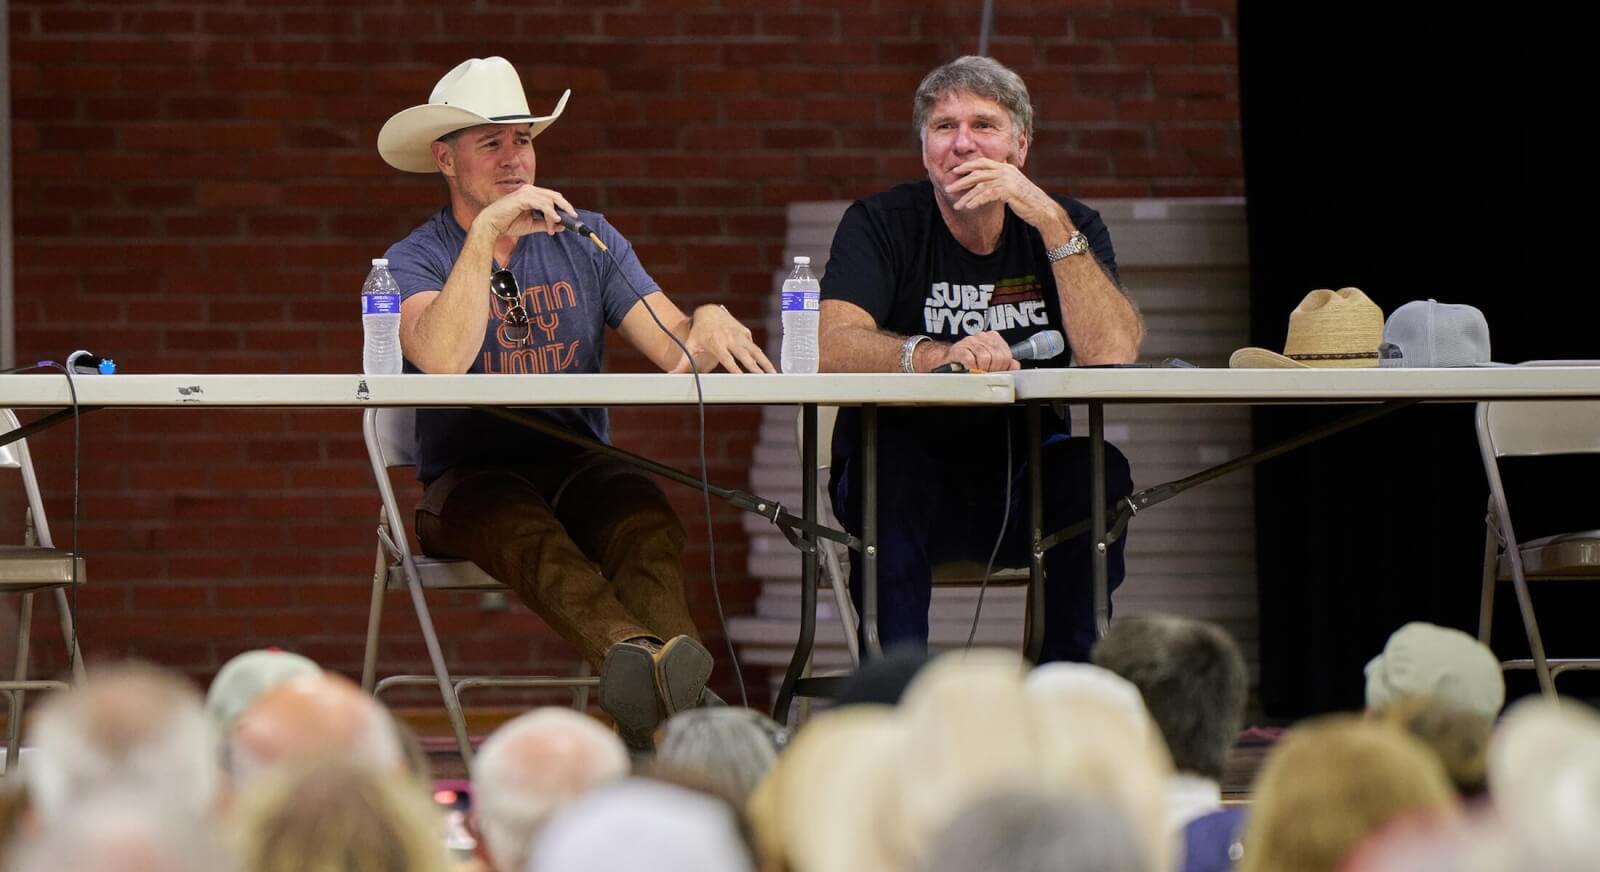 Derek Phillips and Robert Taylor, actors in the Longmire television series, hold microphones while making a presentation seated at a table on a stage with a full audience in the foreground at the Bomber Mountain Civic Center gymnasium in 2023.